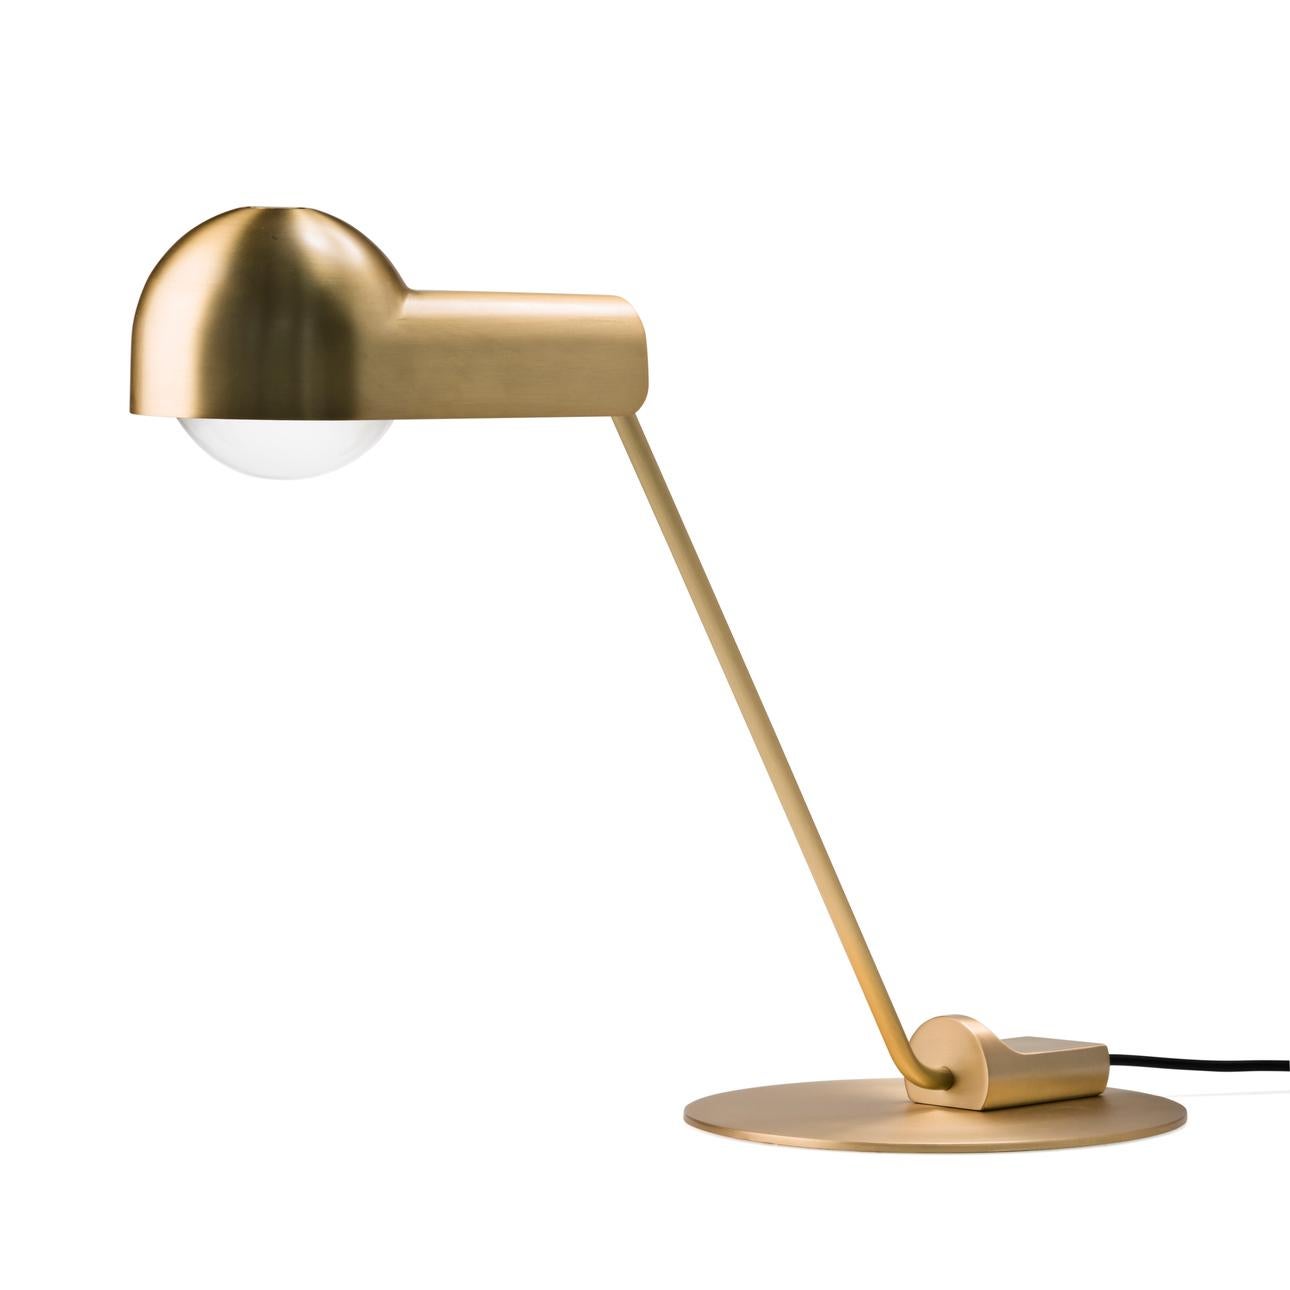 Table lamp designed by Joe Colombo in 1965.

The Domo lamp was originally designed by Italian designer Joe Colombo in 1965. Back then he designed three lamps based on the same core shape. Known for his democratic and functional design, his